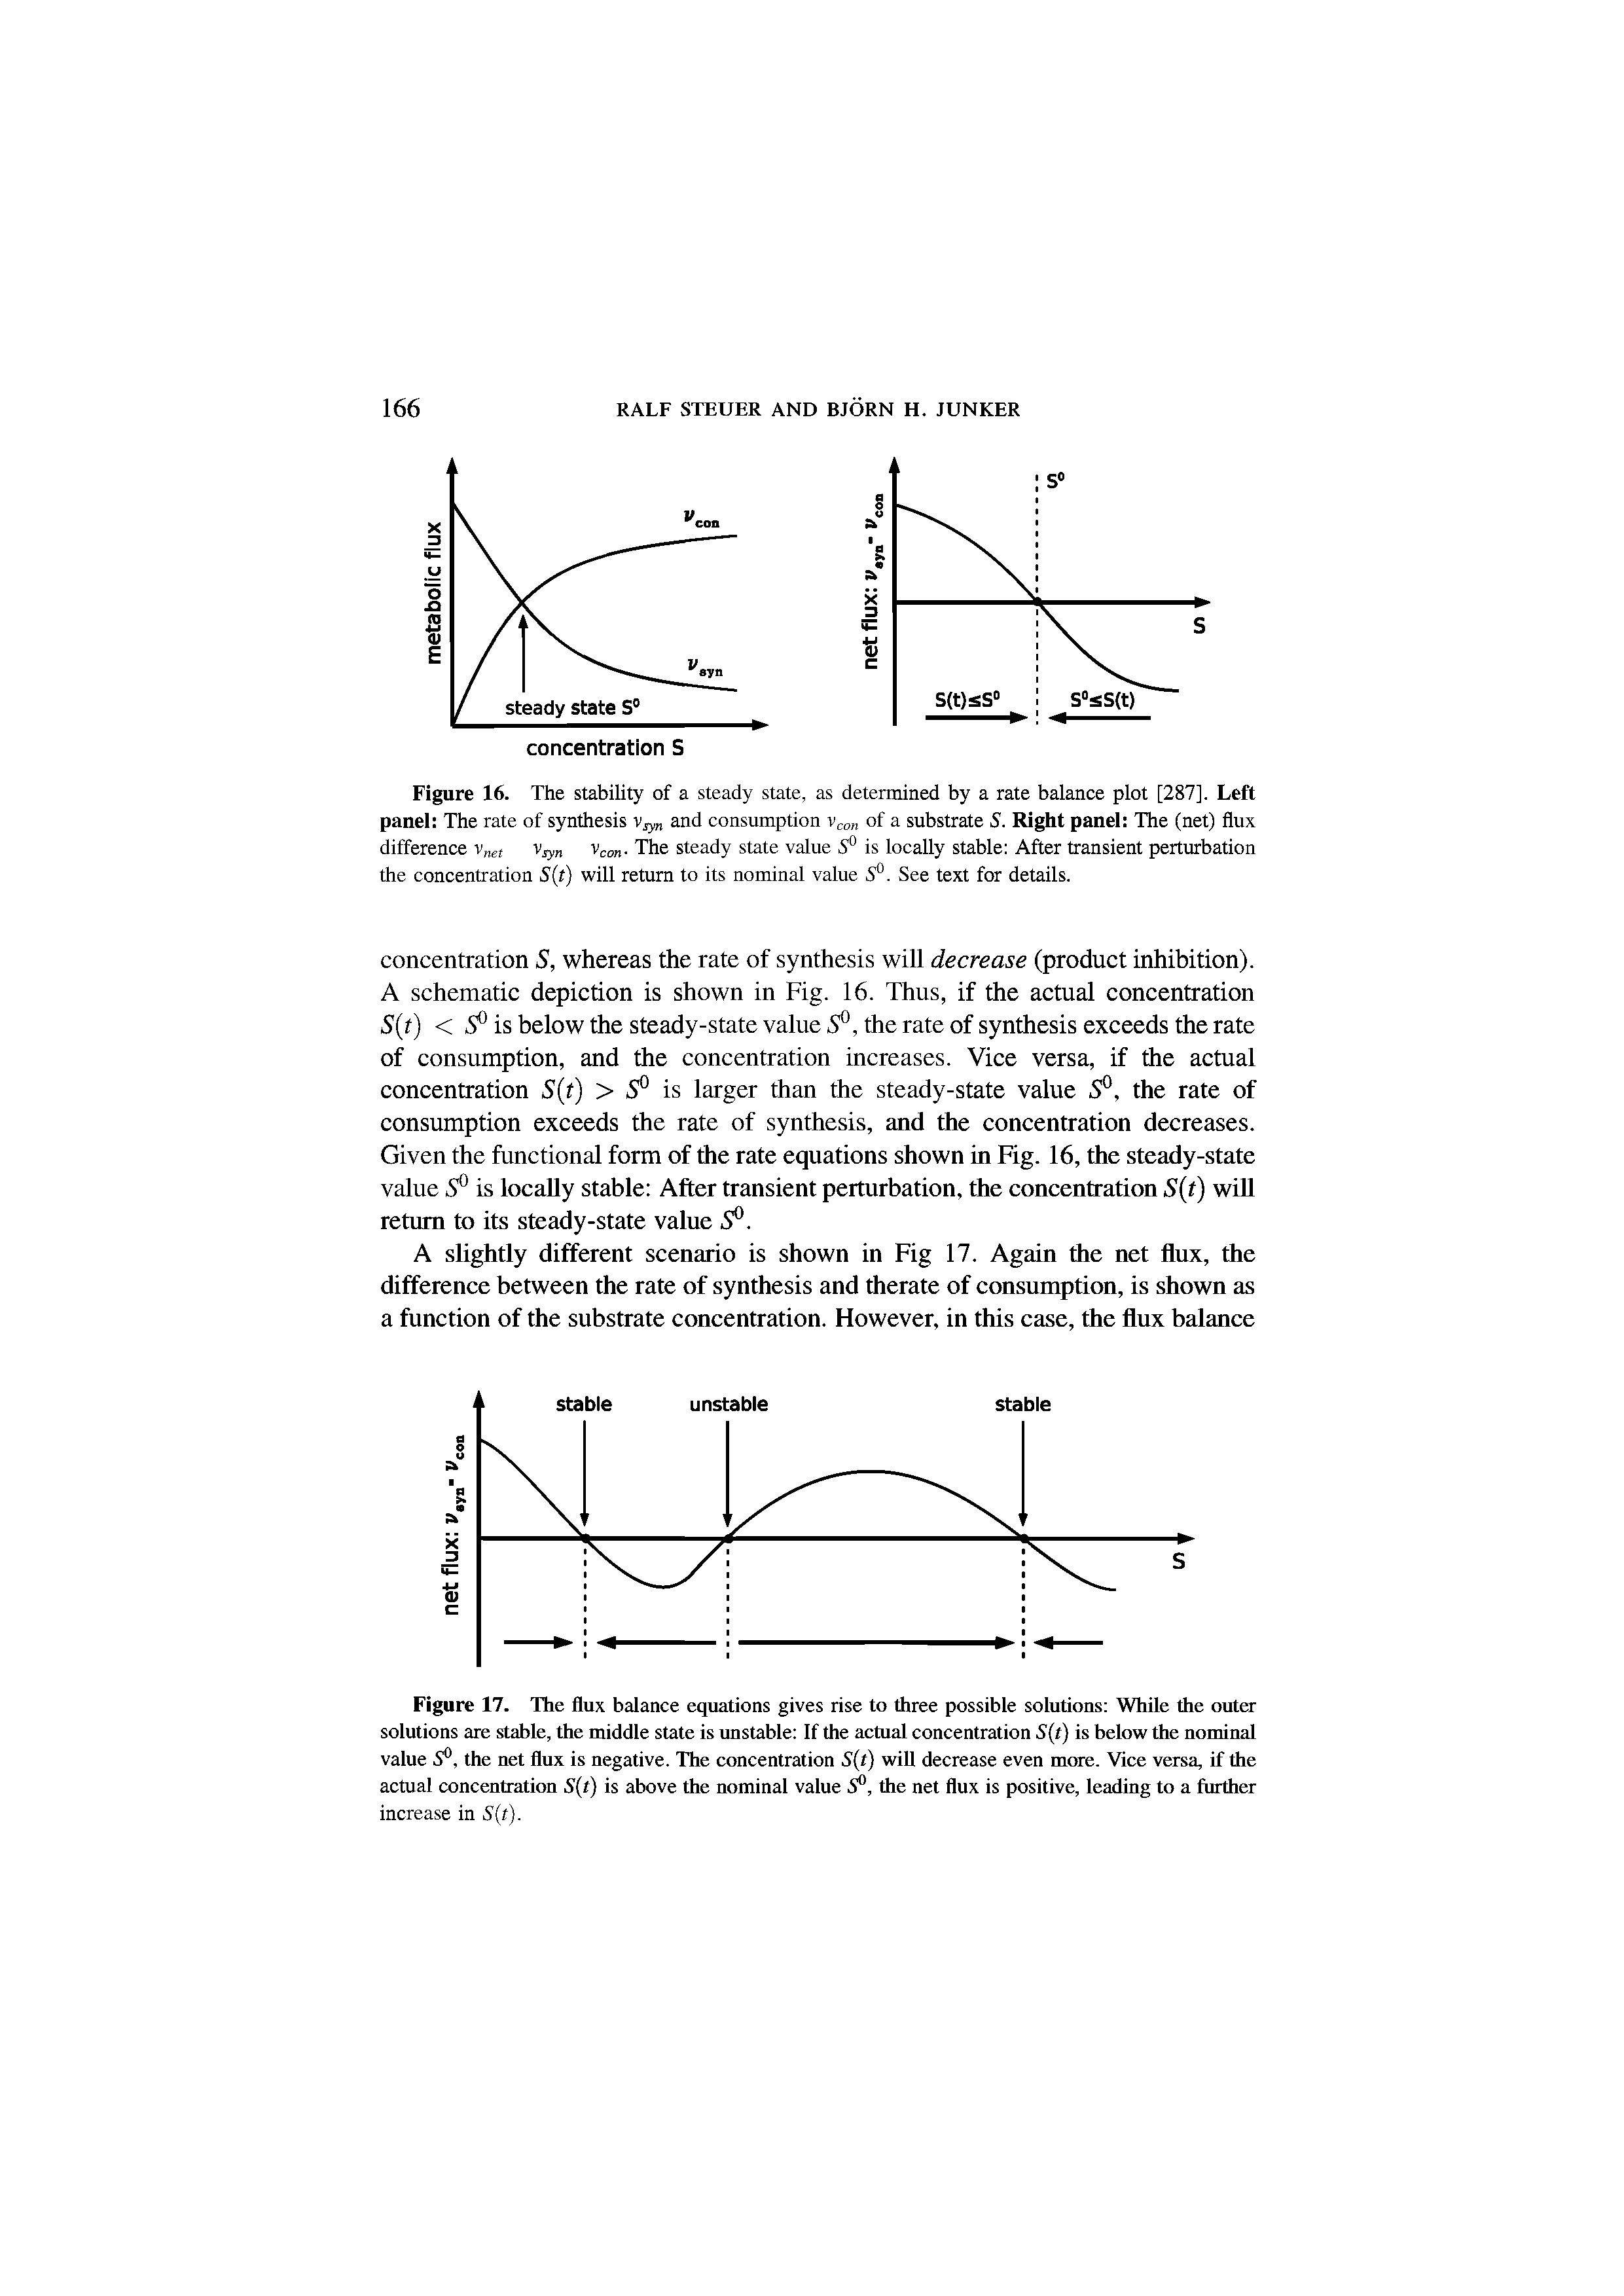 Figure 16. The stability of a steady state, as determined by a rate balance plot [287]. Left panel The rate of synthesis and consumption vcon of a substrate S. Right panel The (net) flux difference vnet vco . The steady state value S° is locally stable After transient perturbation...